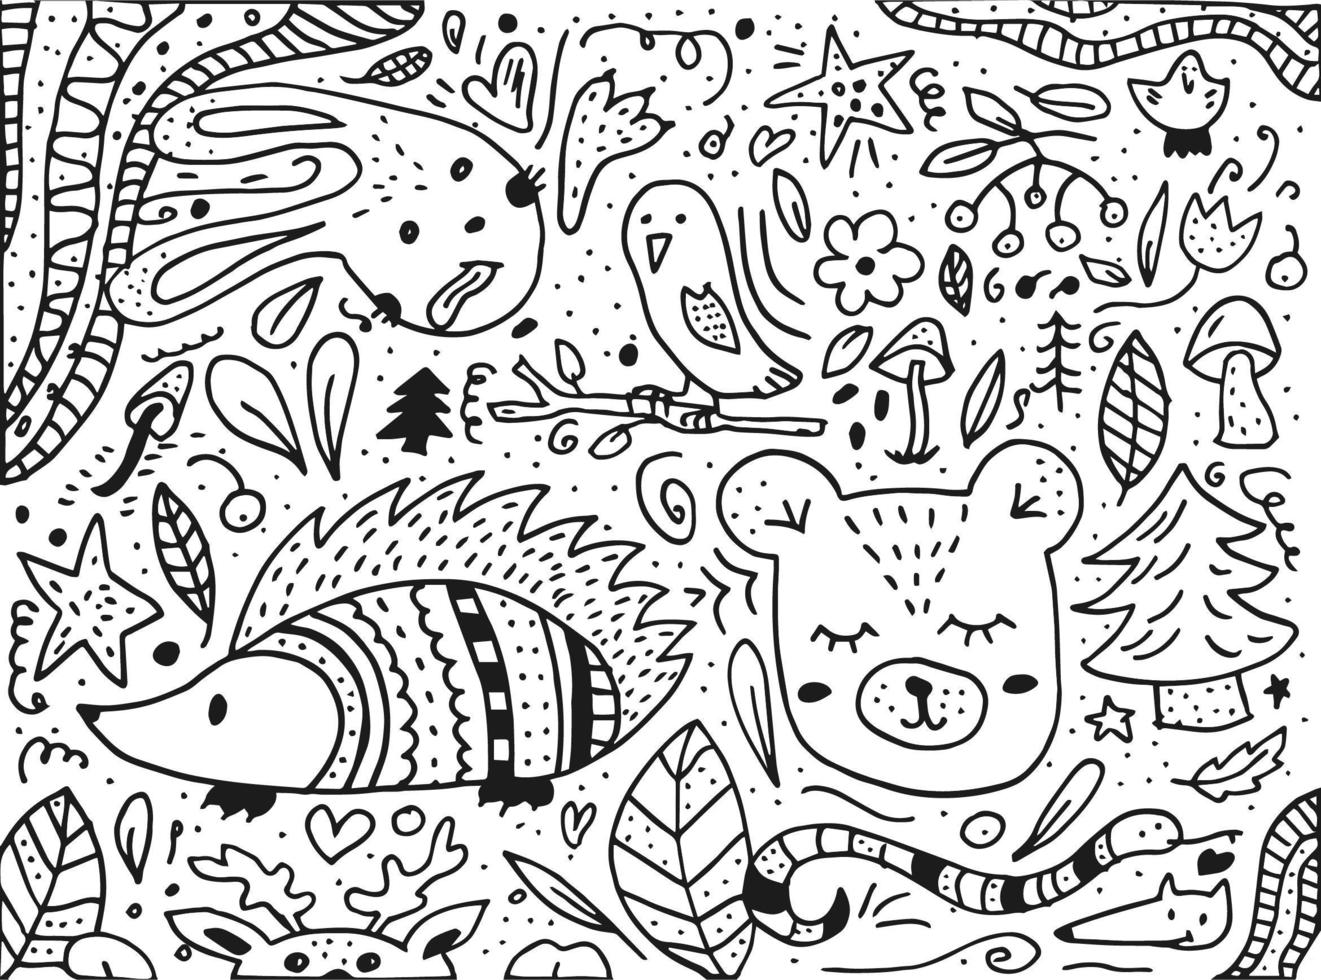 Doodle style hand drawn. Nature, animals and elements. Vector illustration. Forest dwellers. Black and white illustration.